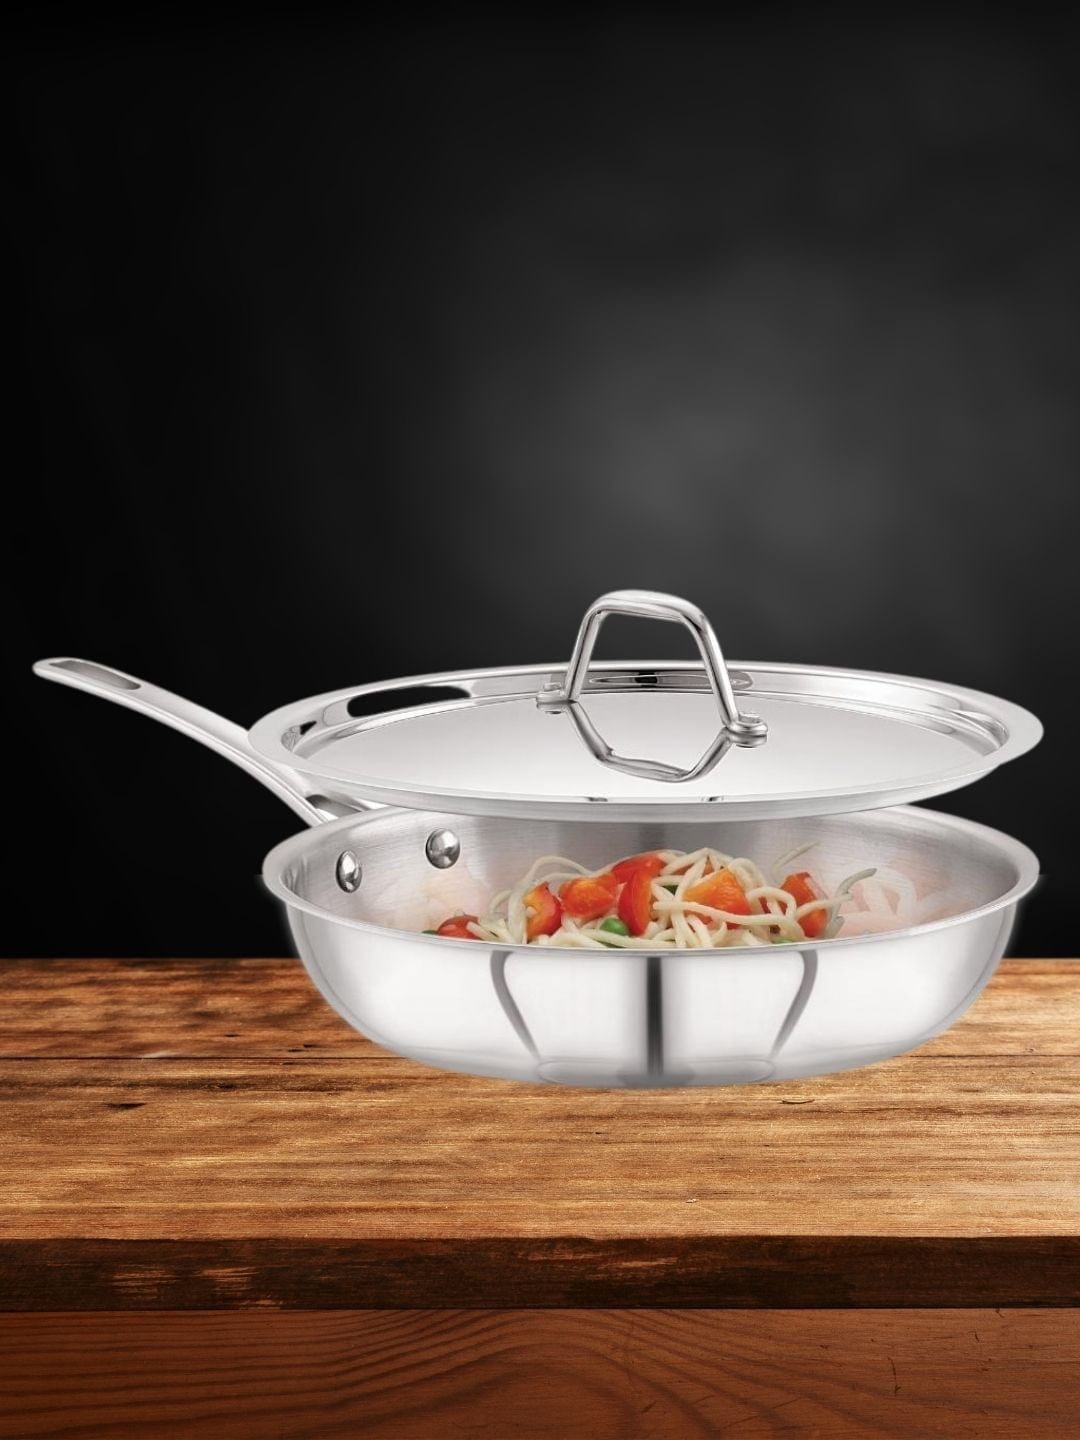 MAGNUS Silver-Toned Solid Stainless Steel Fry Pan with Lid Cookware Price in India